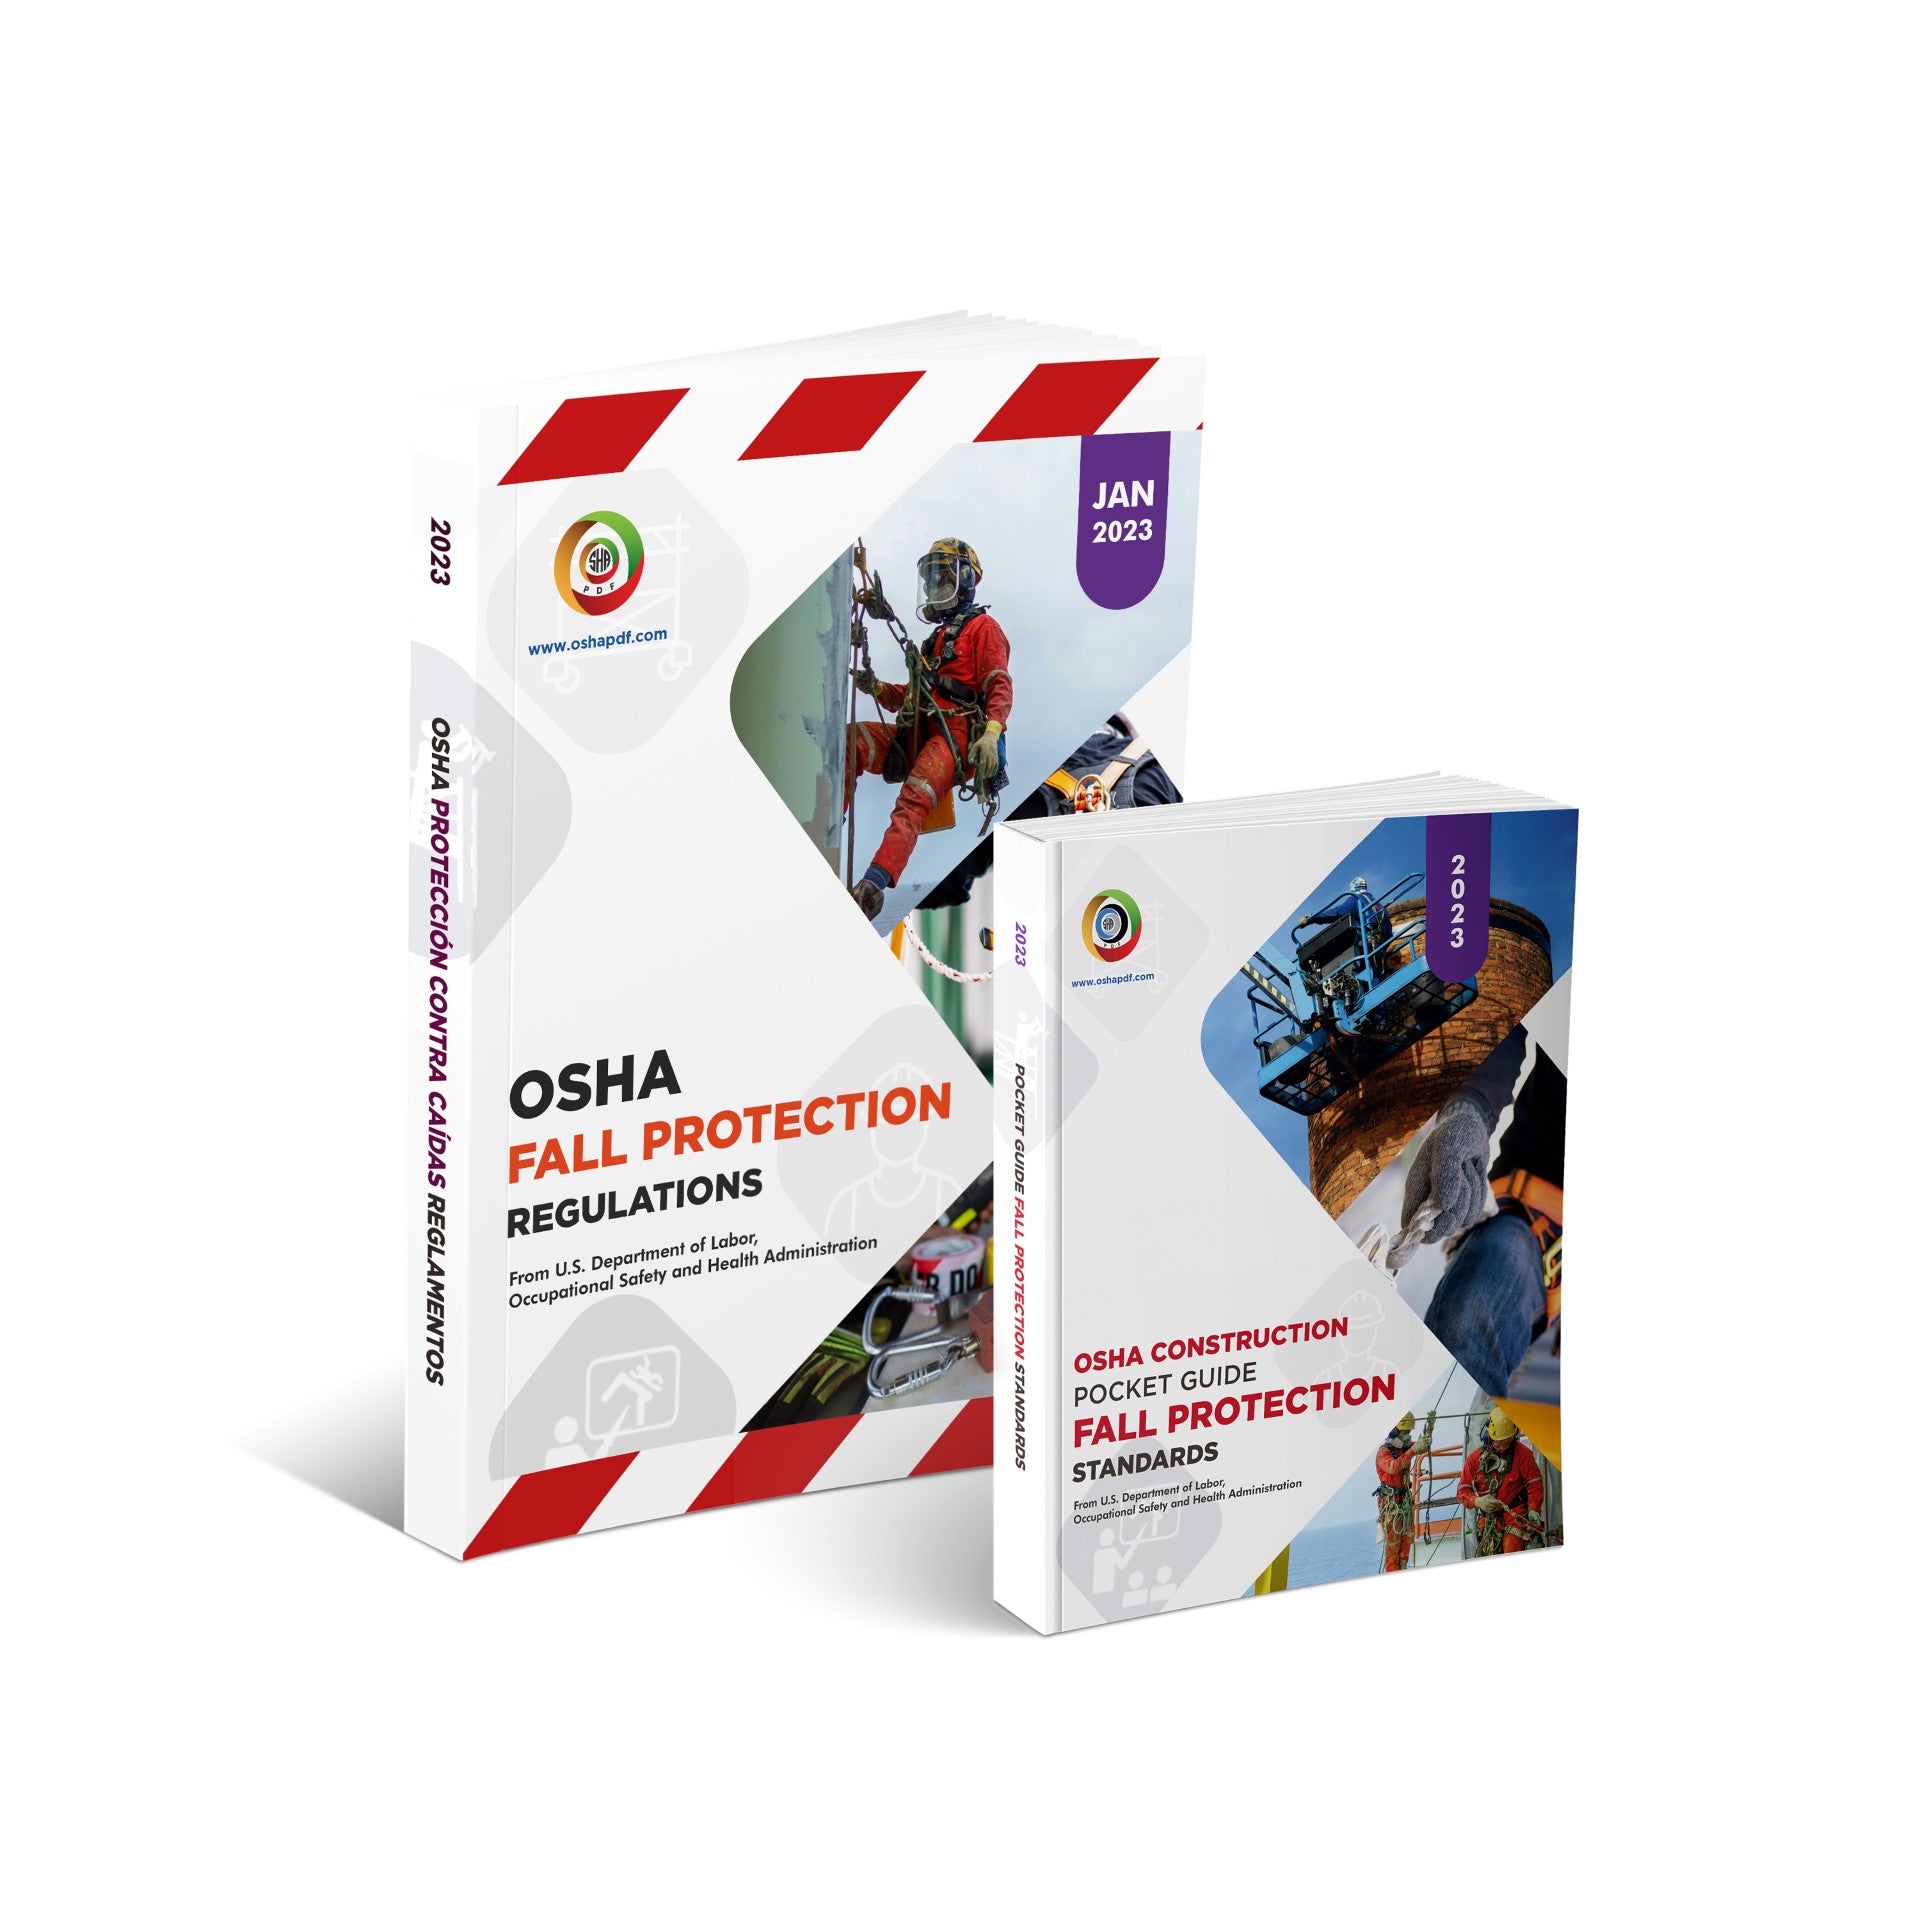 Fall Protection Regulations 2023 Book and Pocket Guide Combo